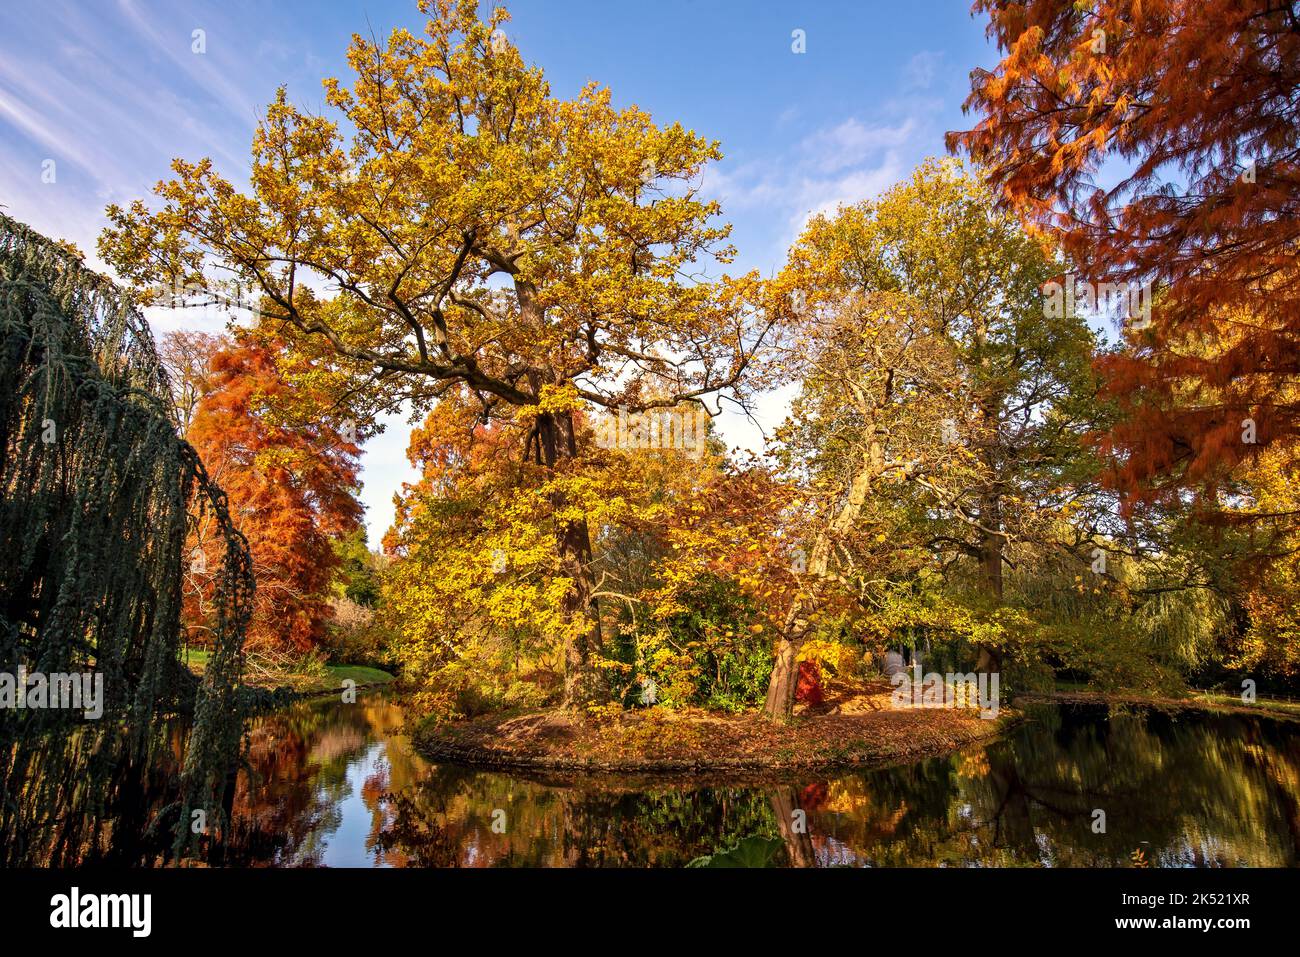 Fall foliage and water reflections in a pond in Vallee aux Loups arboretum near Paris, France. Stock Photo